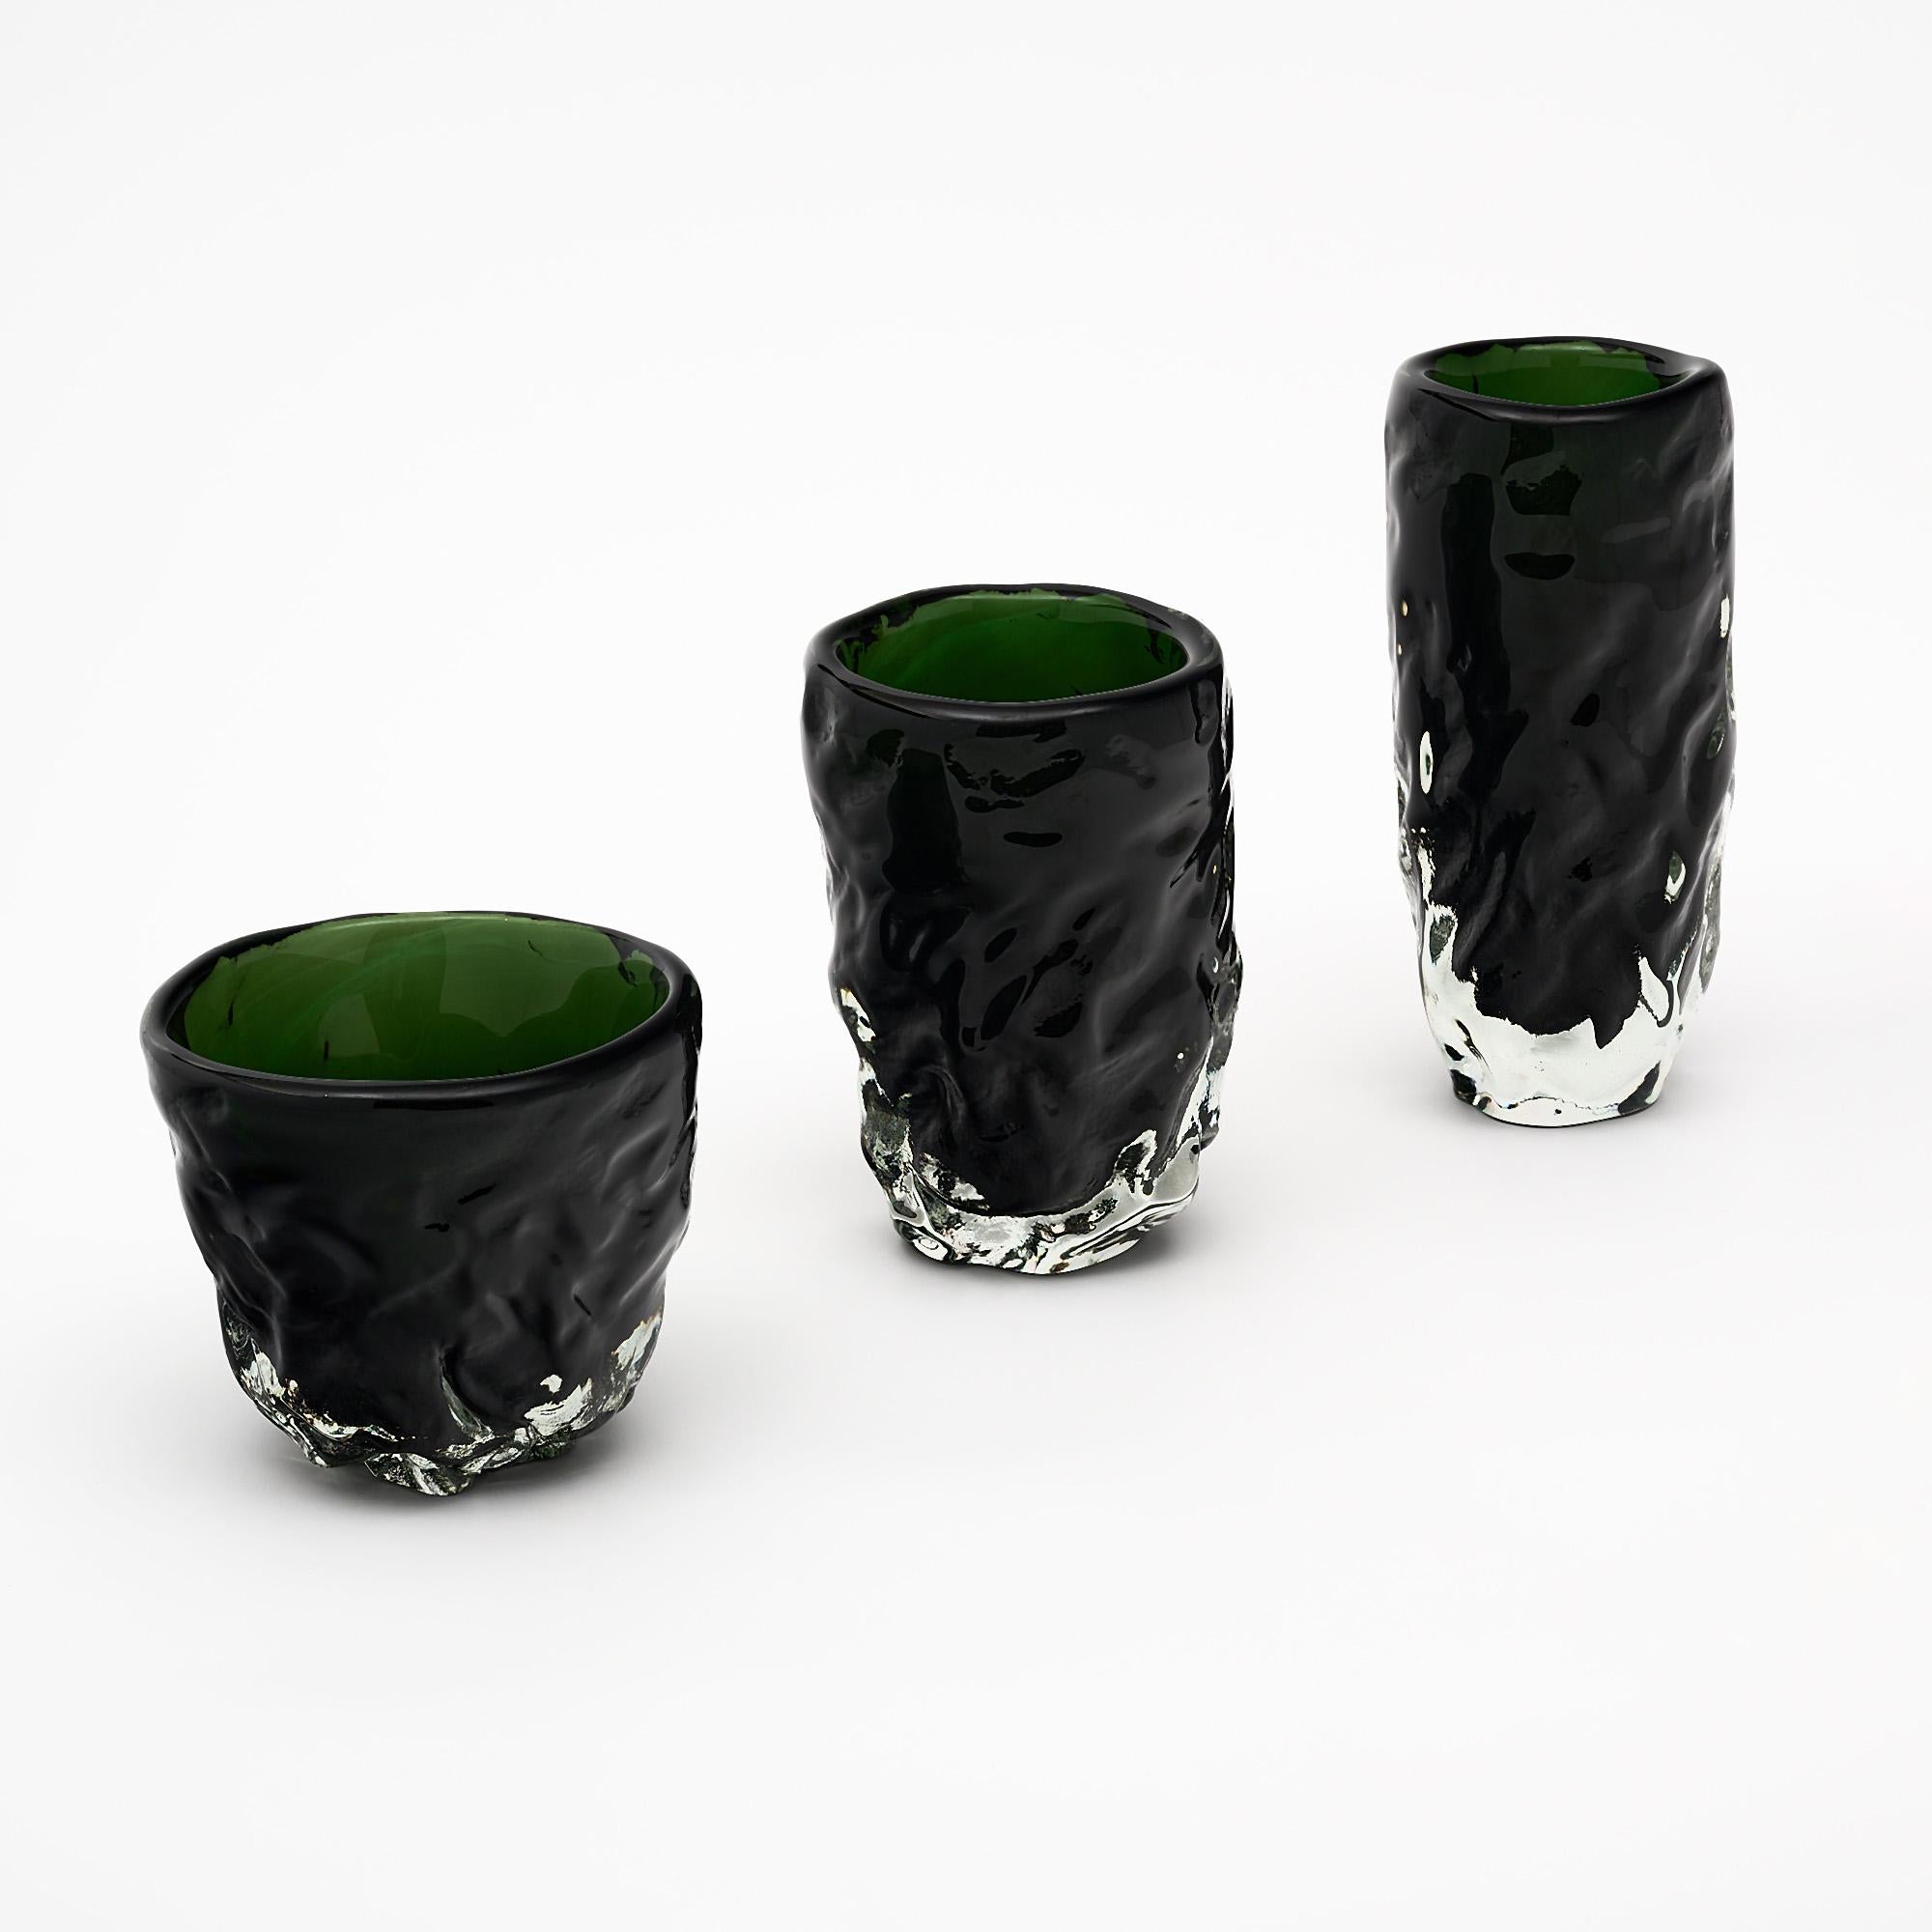 Set of three vases from the Island  of Murano outside of Venice; Italy. They are hand blown in a deep green and clear colored glass. The organic shape is an homage to Alberto Burri. Created and signed by Alberto Dona.

Tall Vase
H: 16”
D: